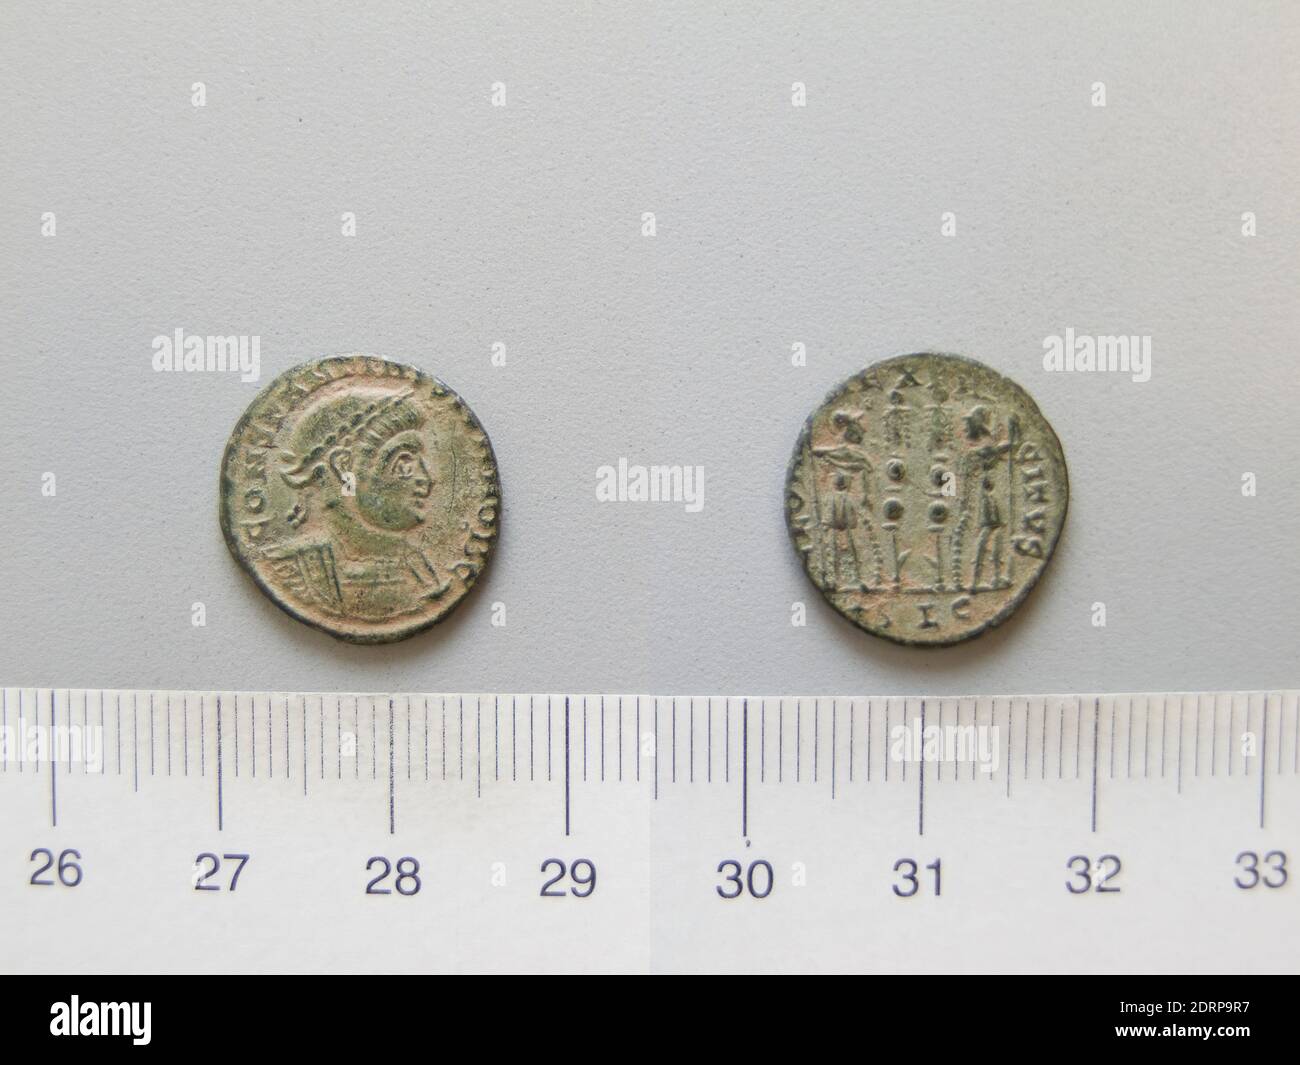 Ruler: Constantine I, Emperor of Rome, A.D. 285–337, ruled A.D. 306–337, Mint: Siscia, Honorand: Constantine II, Emperor of Rome, A.D. 316–340, 1 Nummus of Constantine I, Emperor of Rome from Siscia, 335–37, Argentiferous bronze, 1.97 g, 2:00, 16.6 mm, Made in Siscia, Pannonia, Roman, 4th century, Numismatics Stock Photo